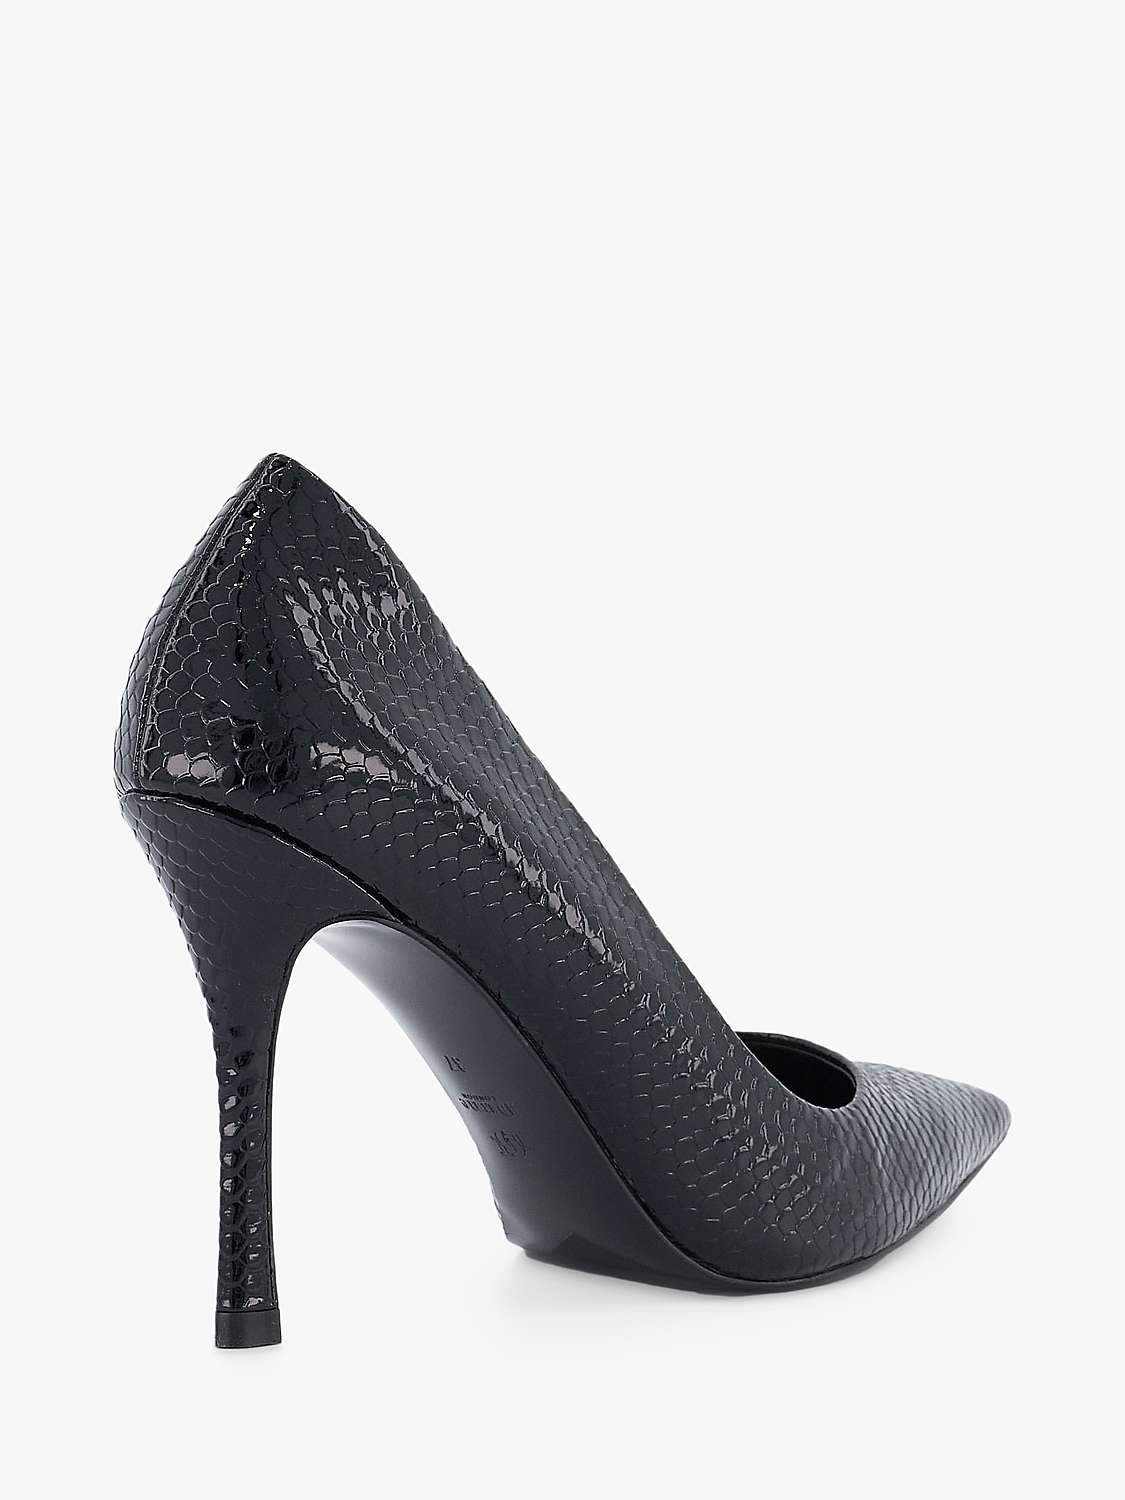 Buy Dune Atlanta Reptile Effect Pointed Toe Court Shoes Online at johnlewis.com